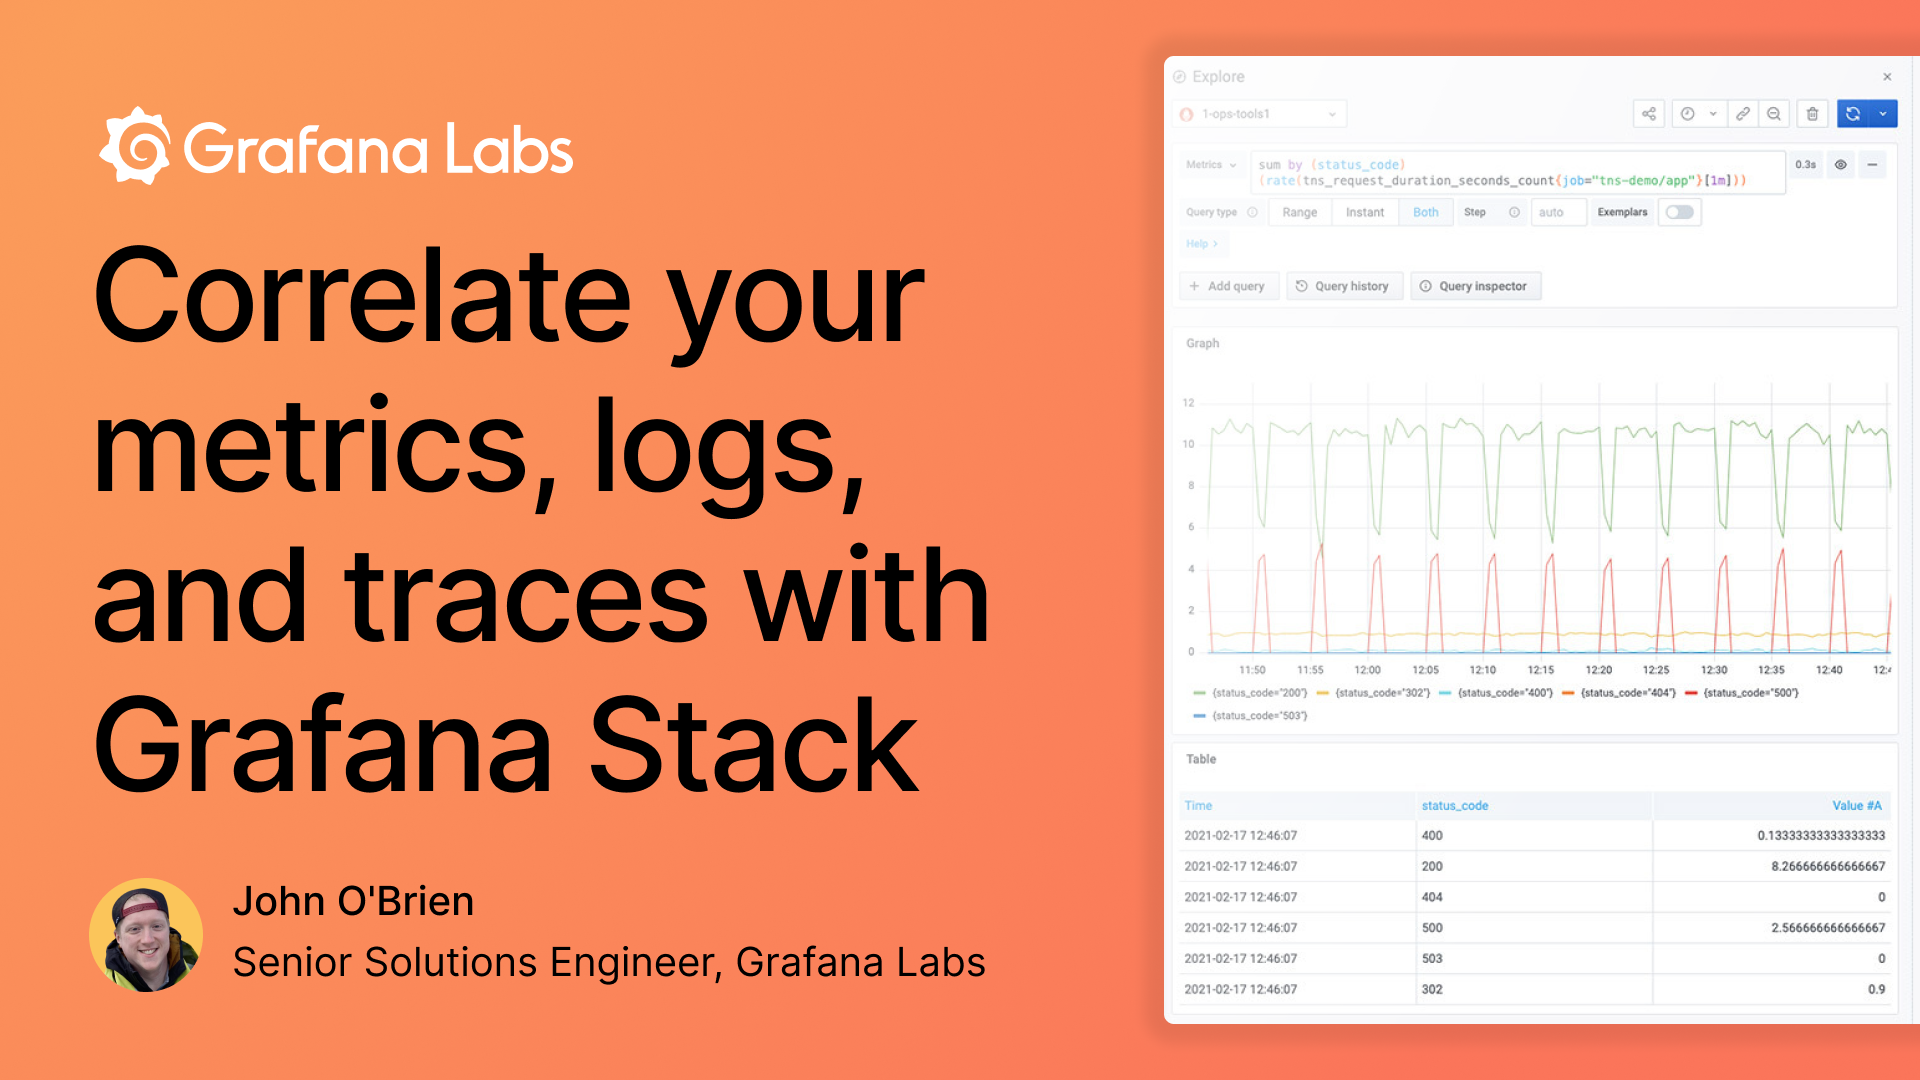 Correlate your metrics, logs, and traces with Grafana Stack